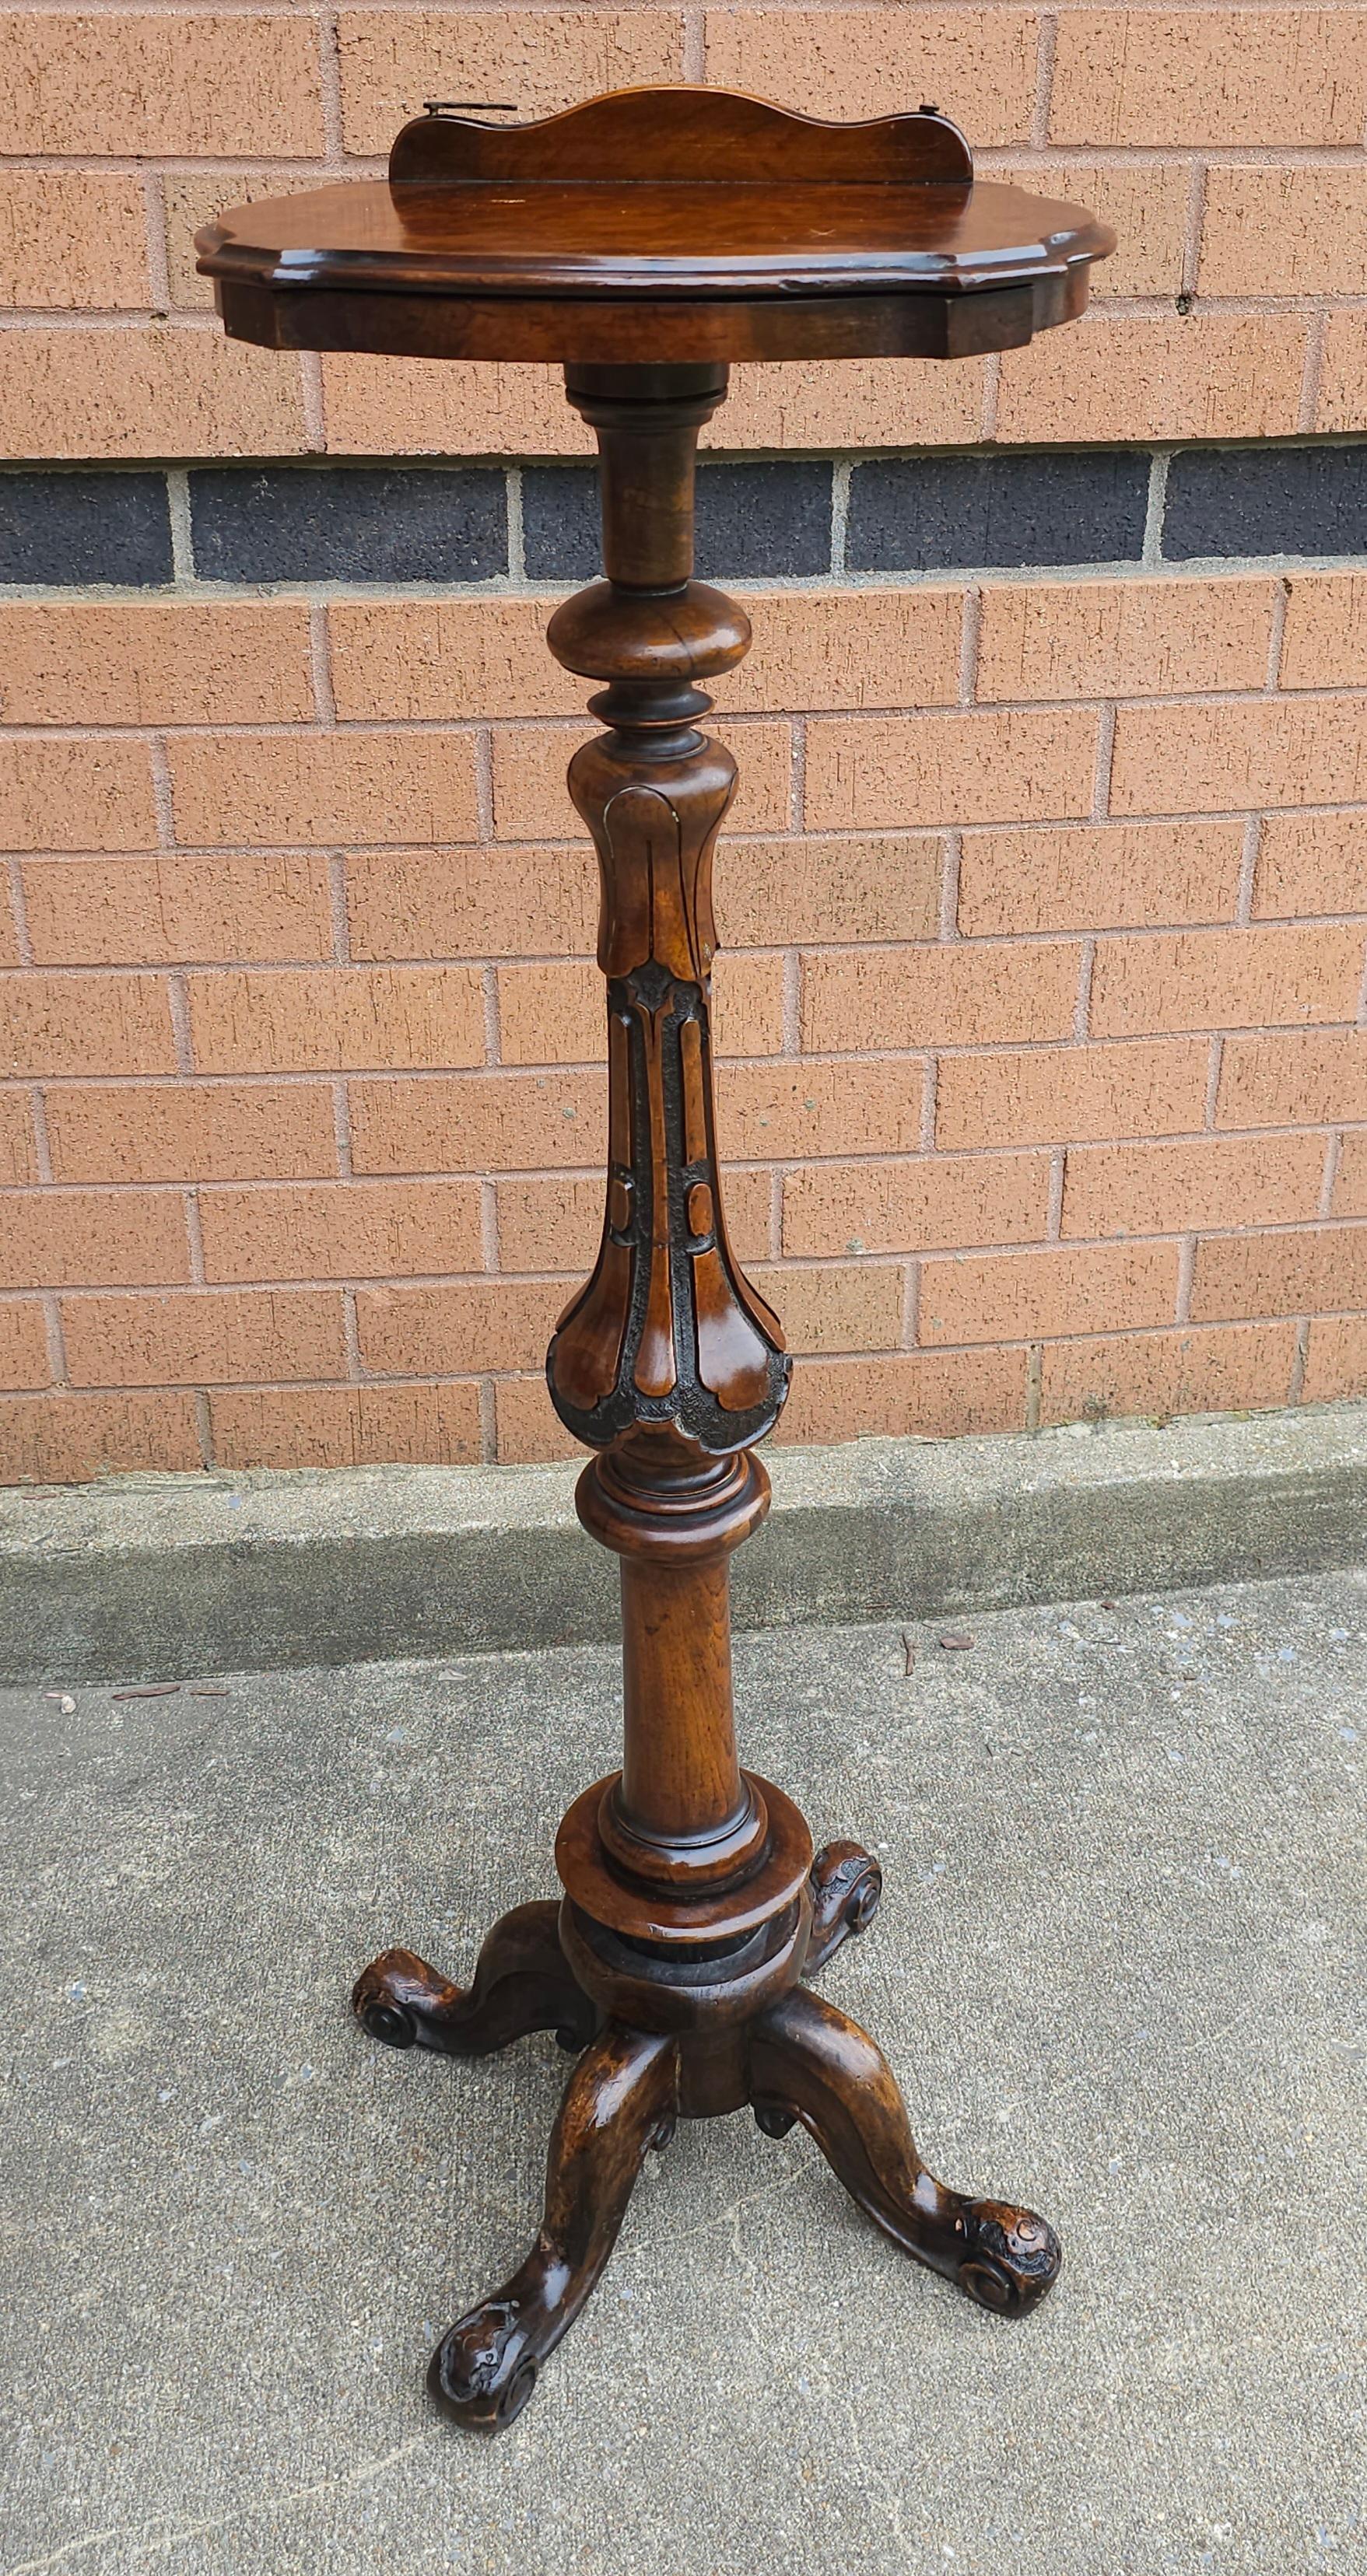 A 19th Century Victorian Rococo Revival Rosewood Quadpod Music Stand

Measures 13